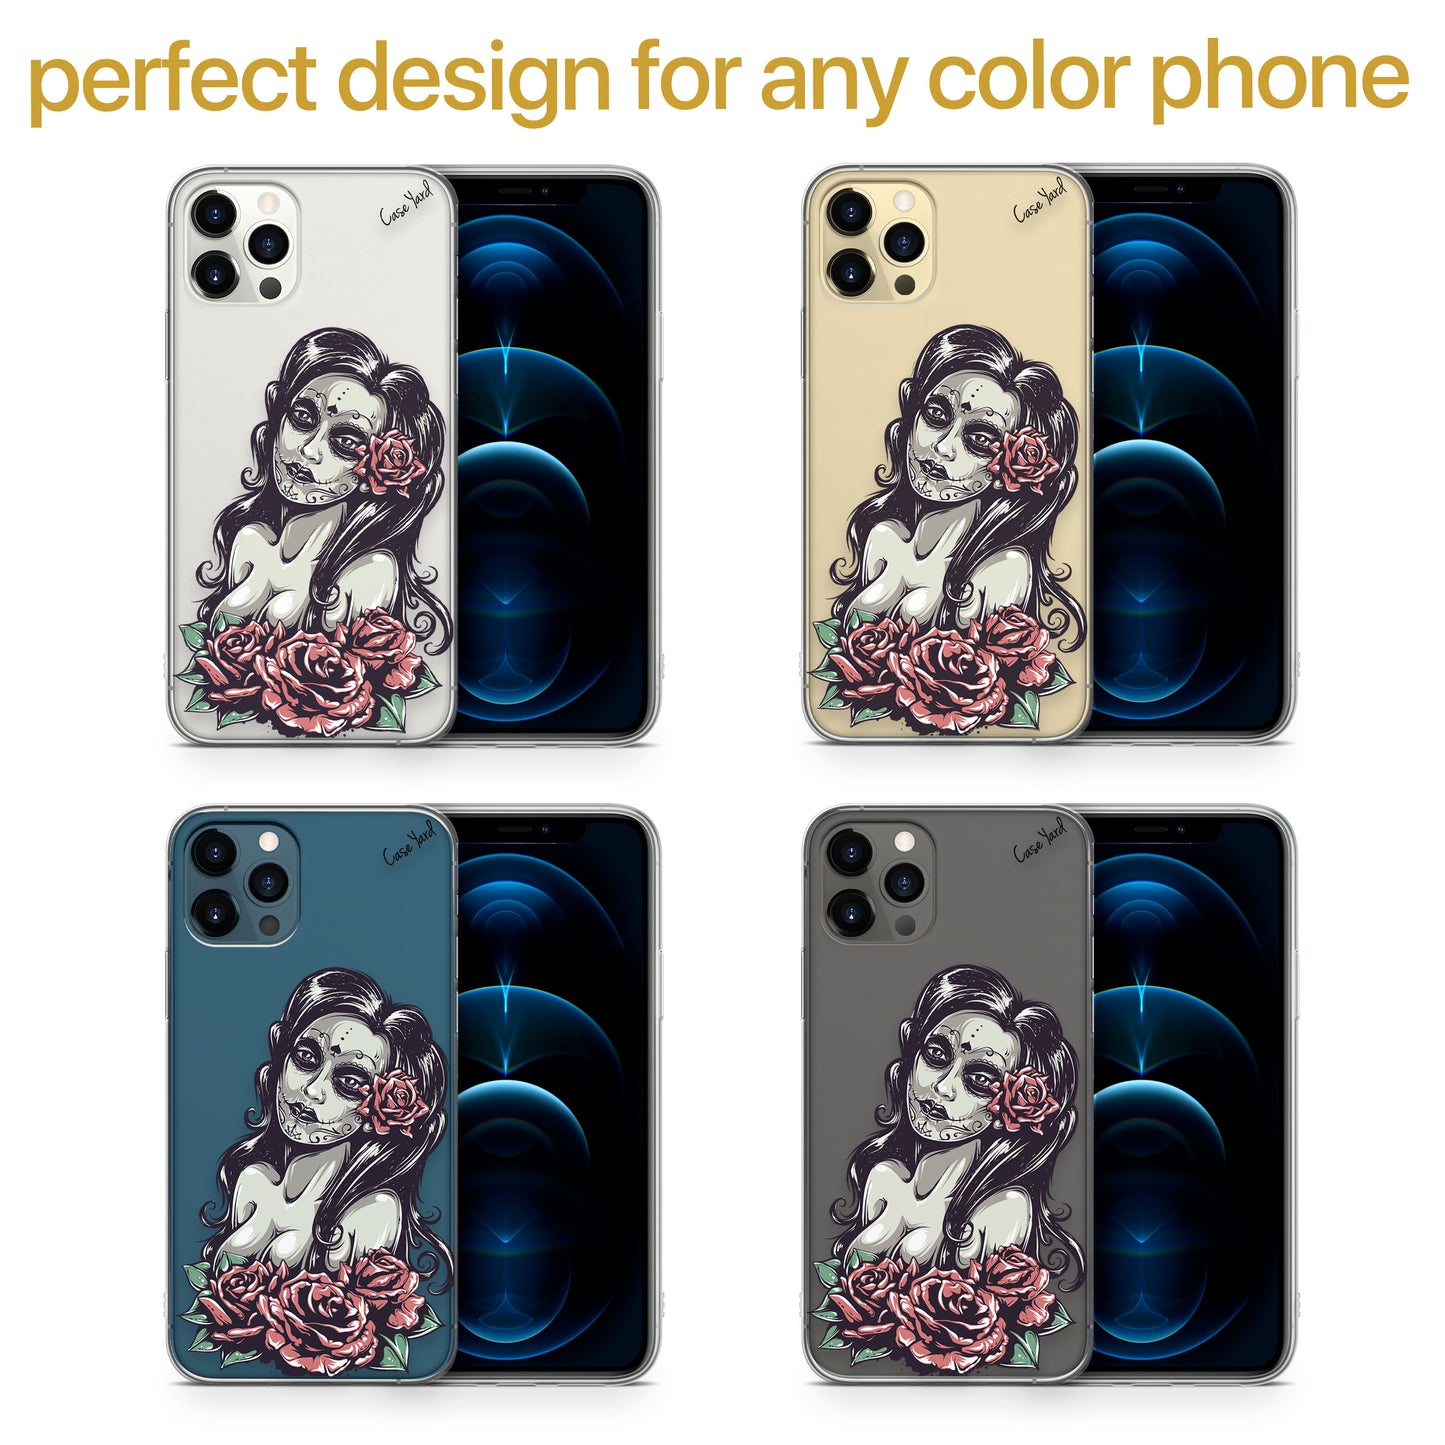 TPU Clear case with (Chicas de los Muertos) Design for iPhone & Samsung Phones